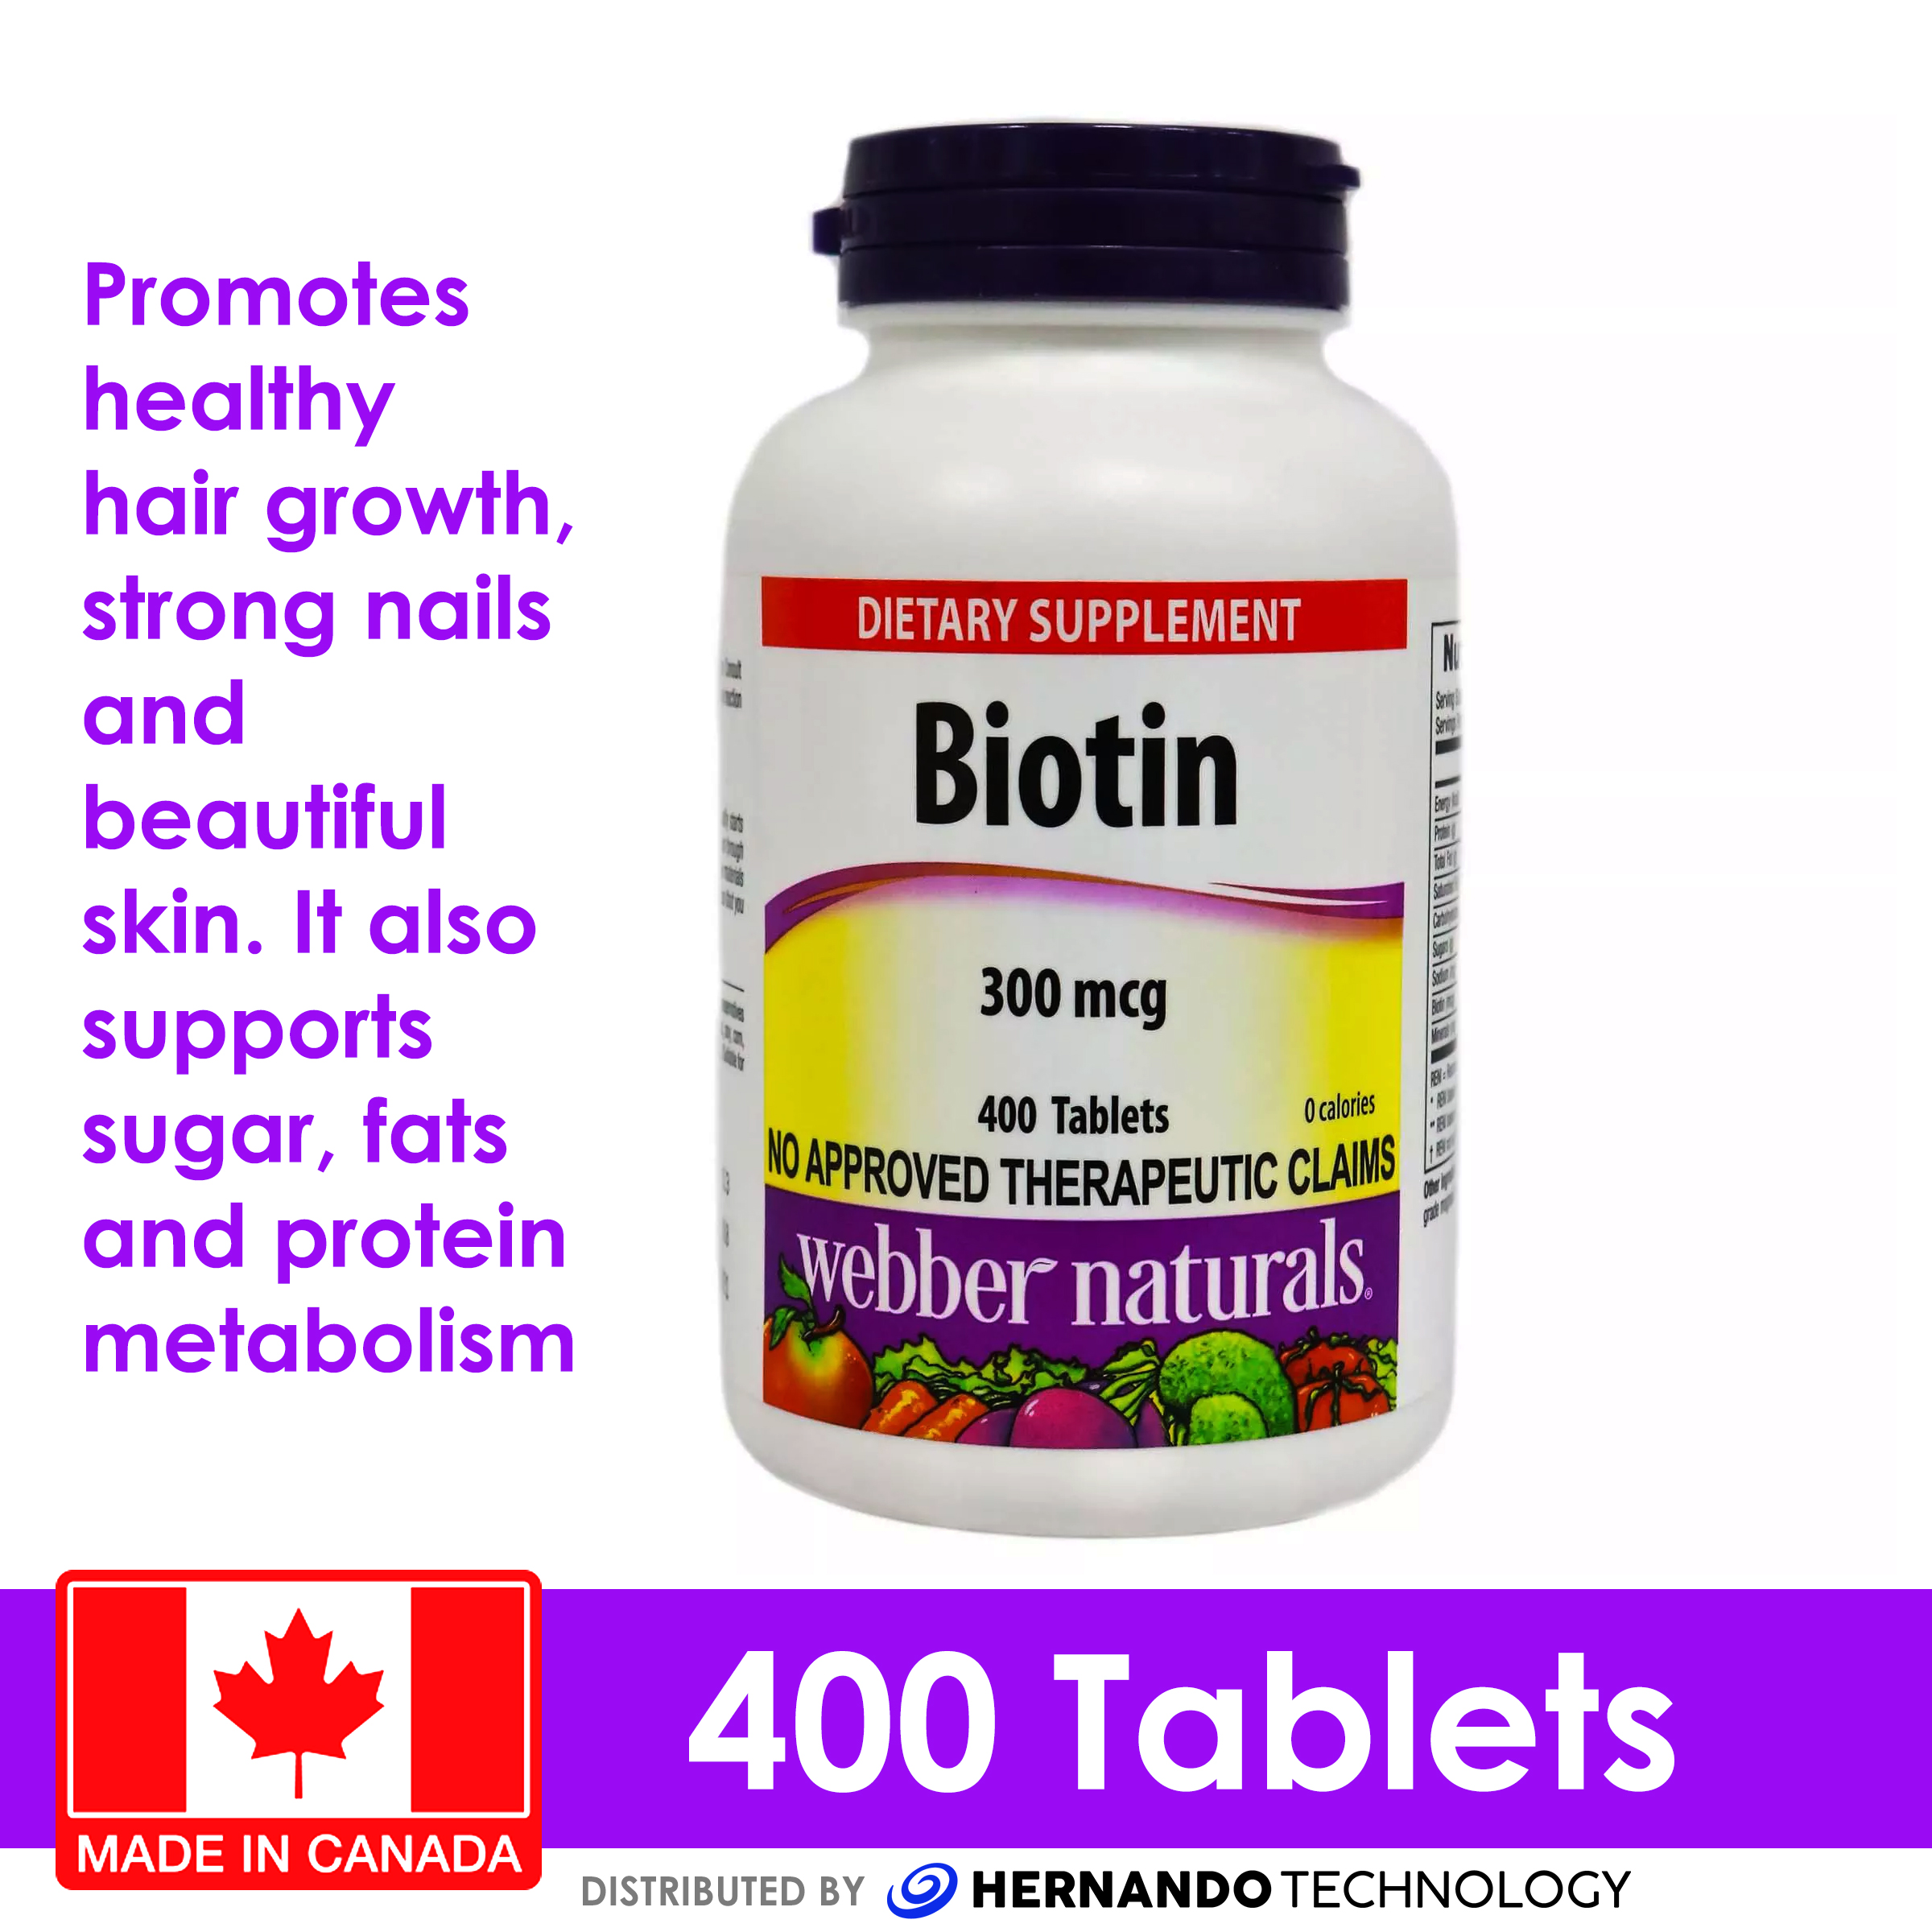 Webber Naturals Biotin 300 mcg (400 Tablets) promotes healthy hair growth,  strong nails and beautiful skin. It also supports sugar, fats and protein  metabolism | Lazada PH